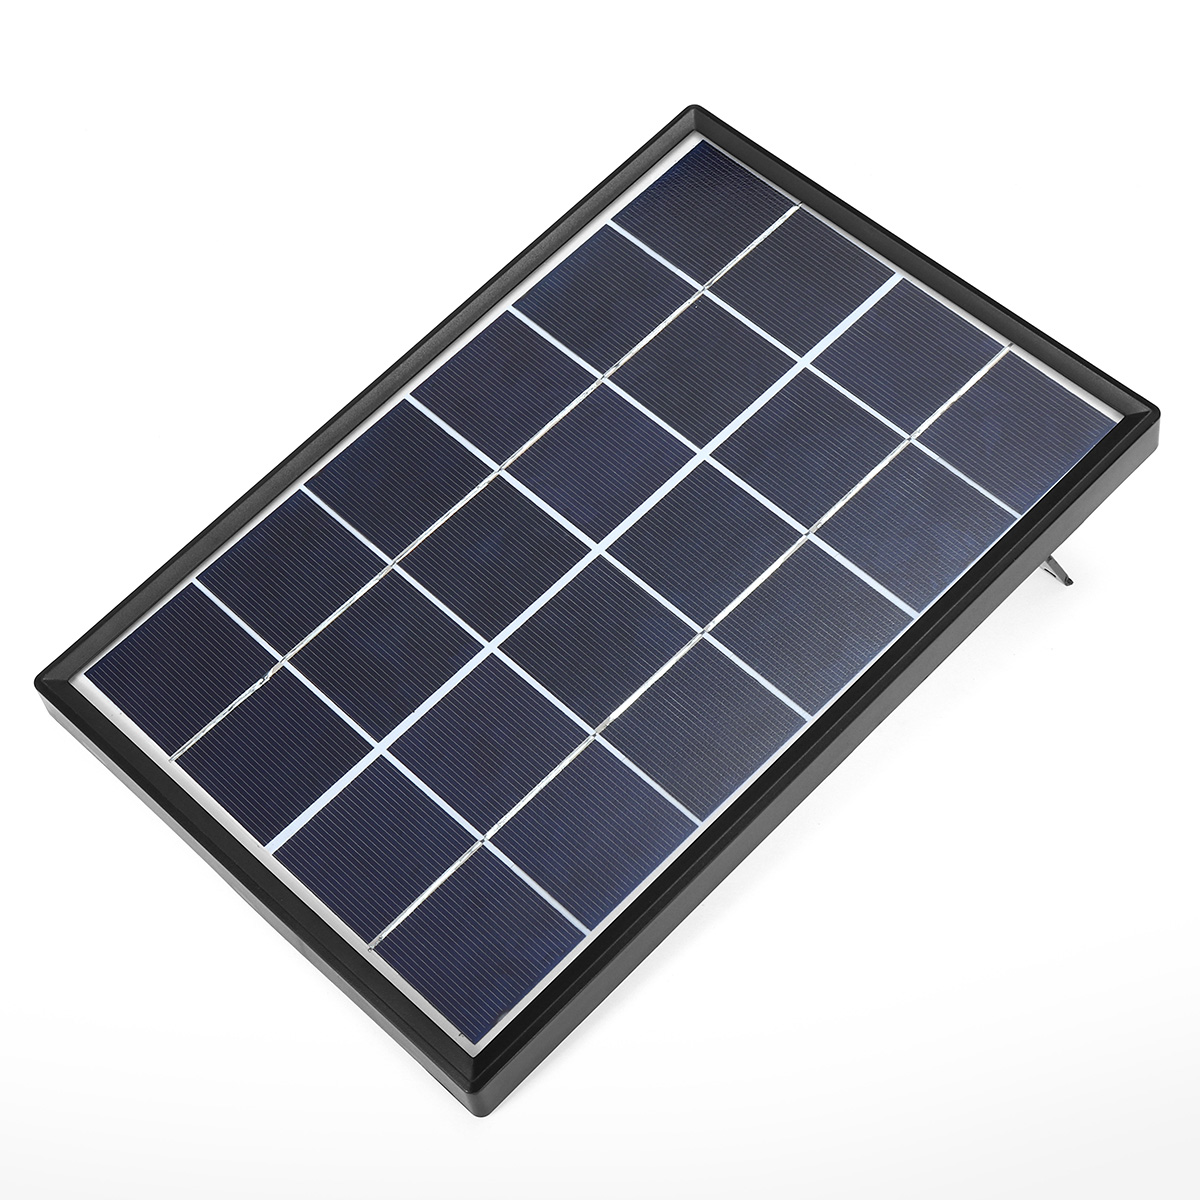 6W 6V 266*175*17mm Polysilicon Solar Panel with Cable & Border 11